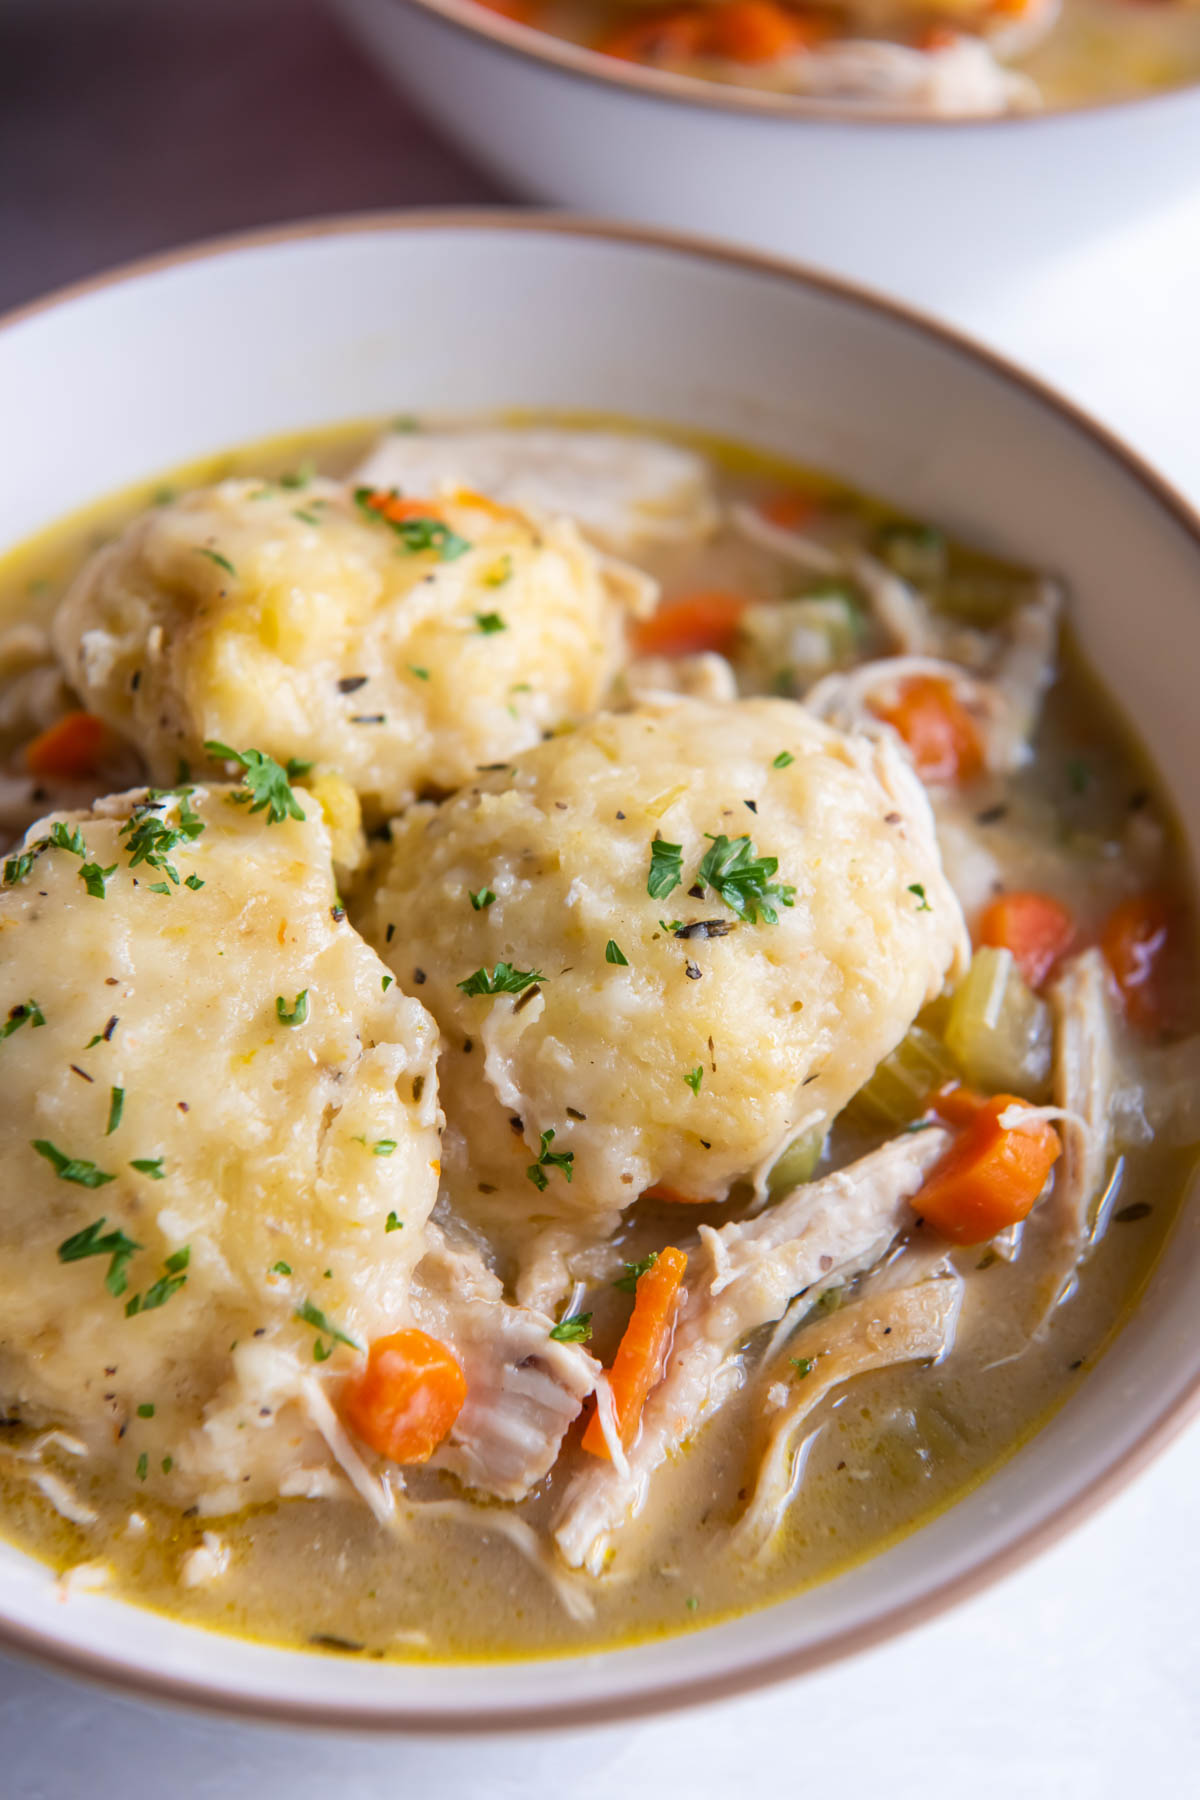 Chicken and dumplings served in a bowl with chopped parsley.